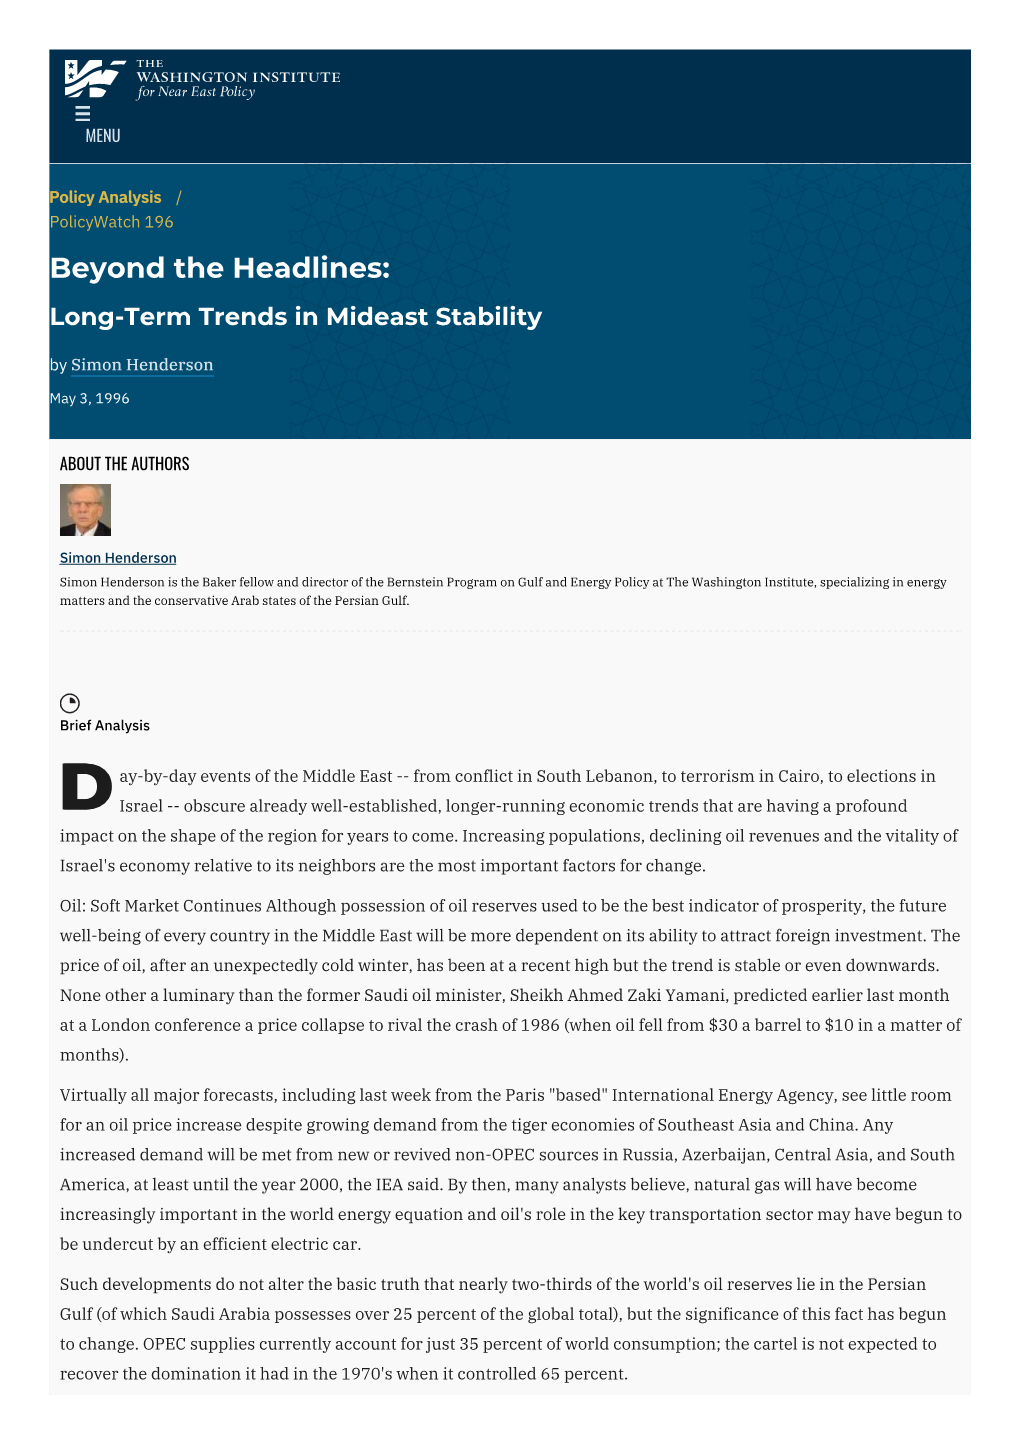 Beyond the Headlines: Long-Term Trends in Mideast Stability by Simon Henderson